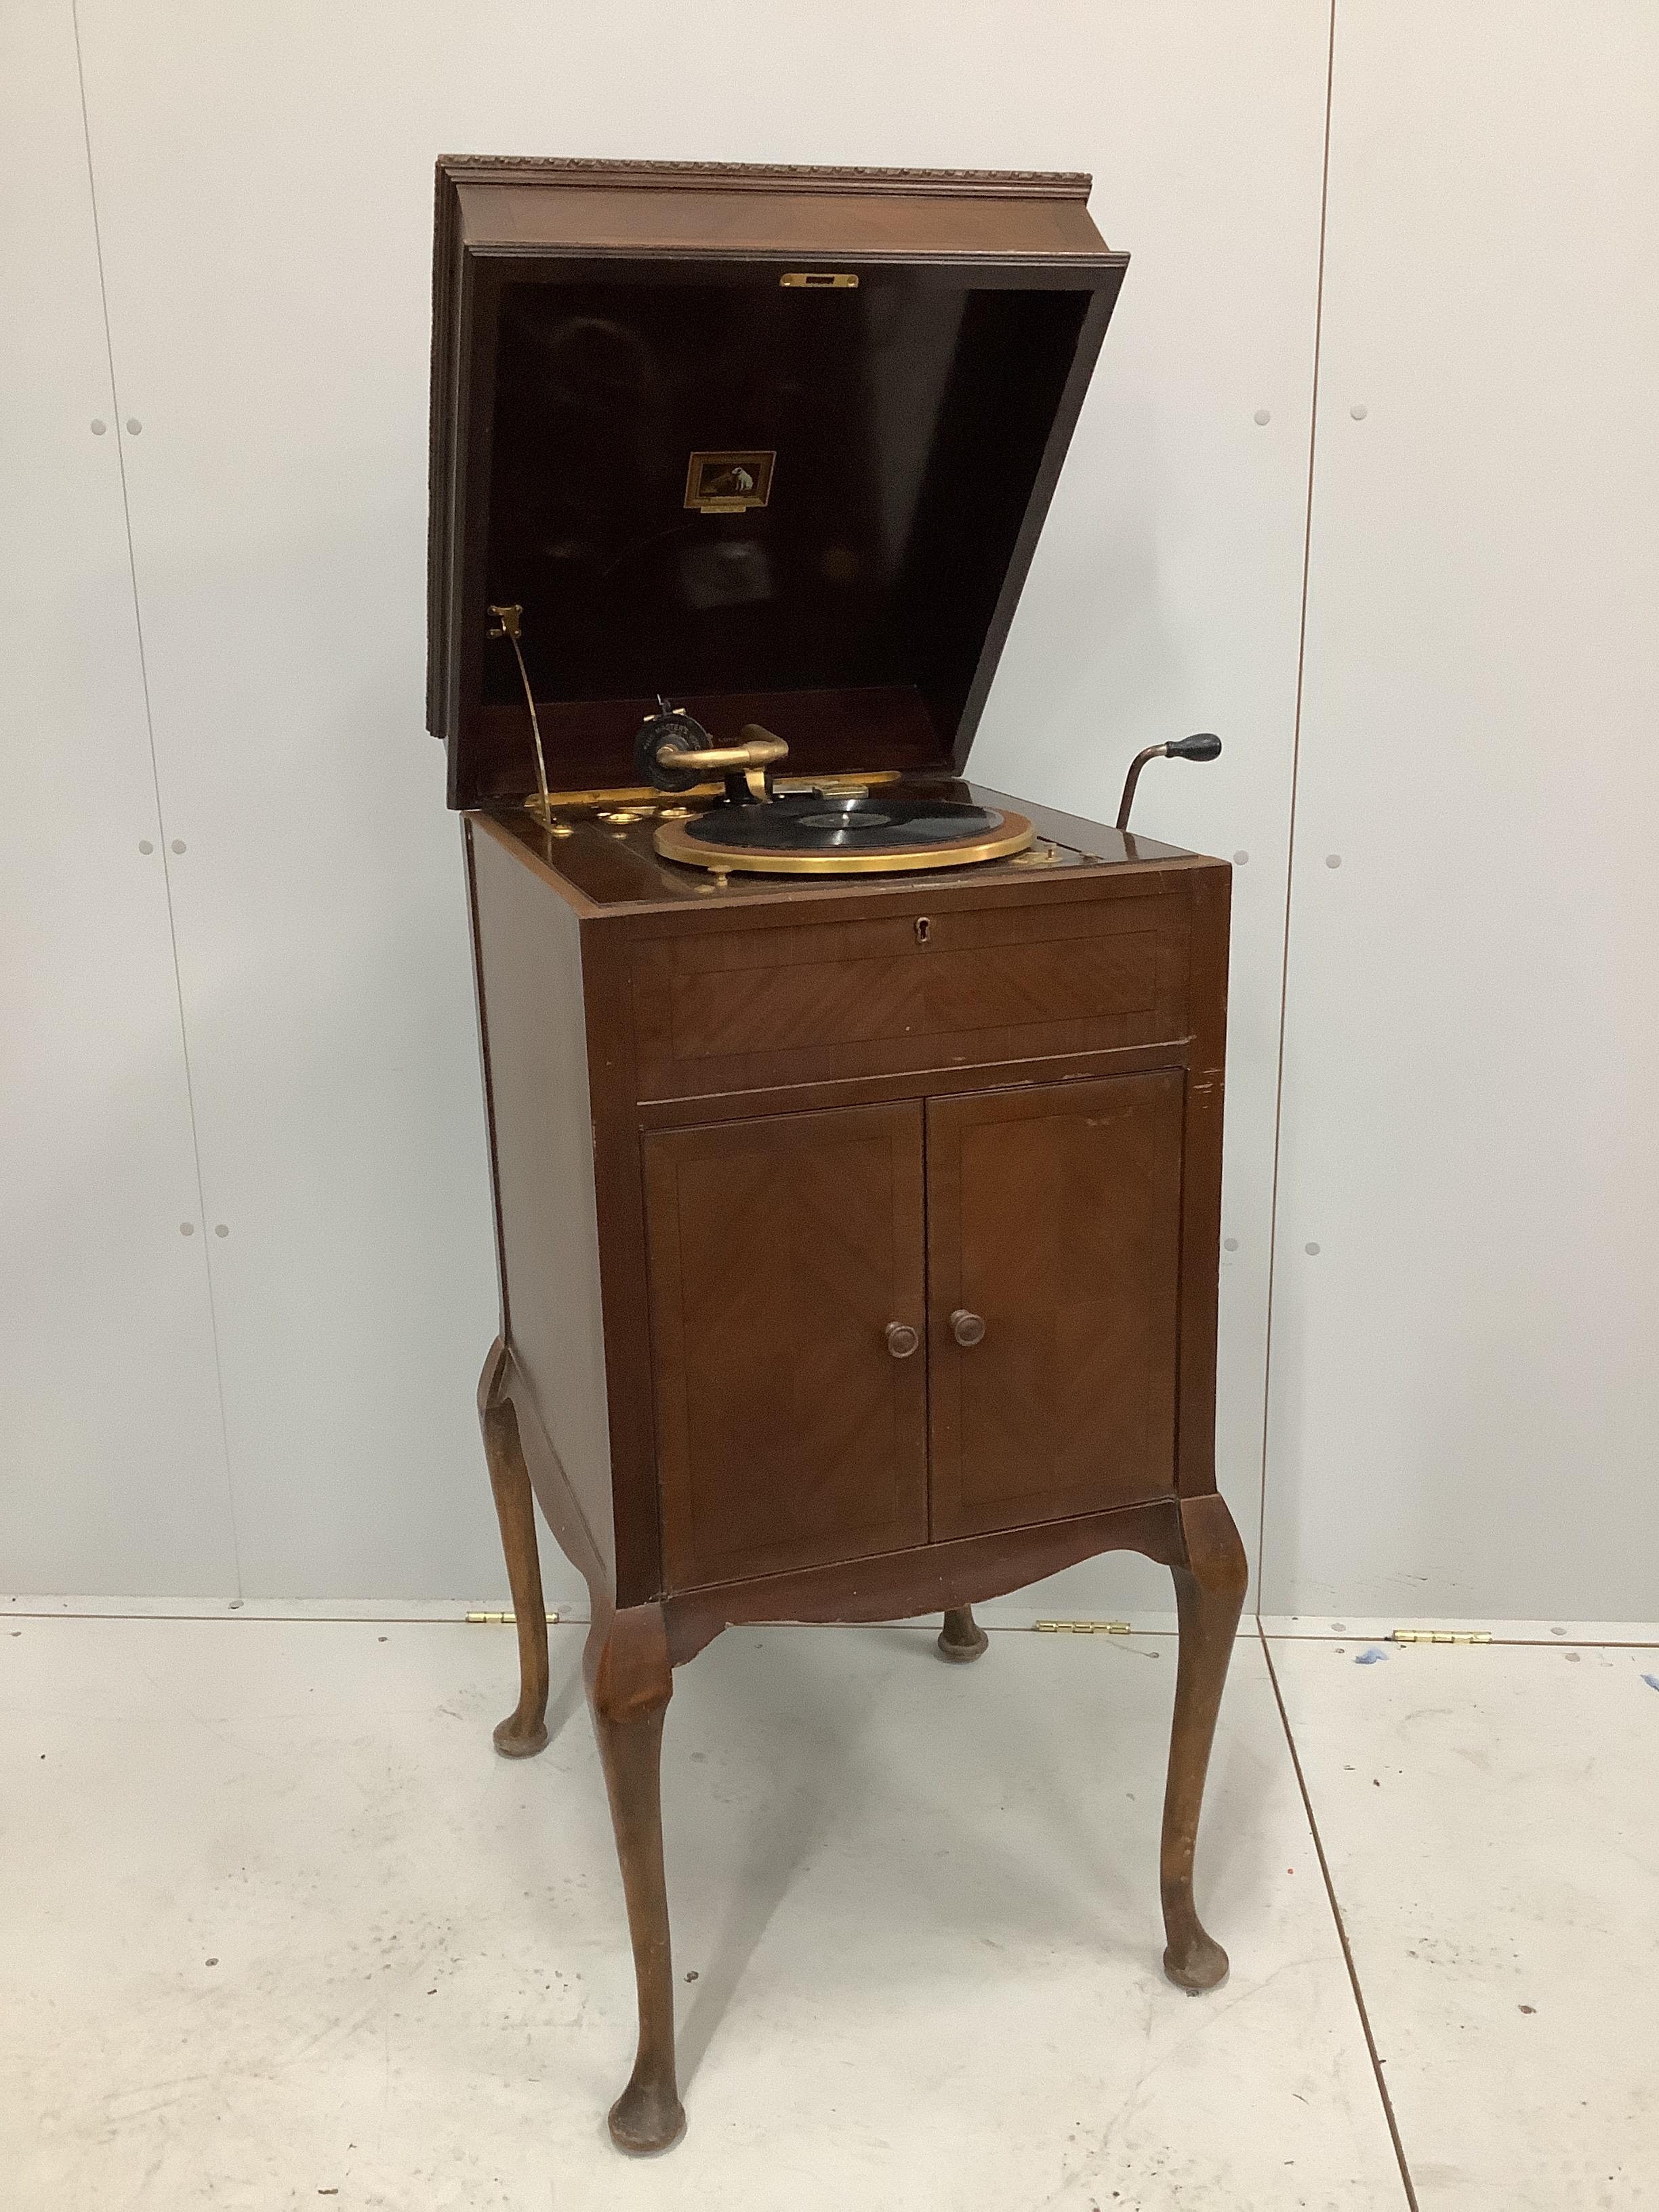 An early 20th century HMV mahogany cabinet, gramophone retailed by Selfridges, model 511, width 52cm, depth 57cm, height 110cm together with approximately sixty records                                                    